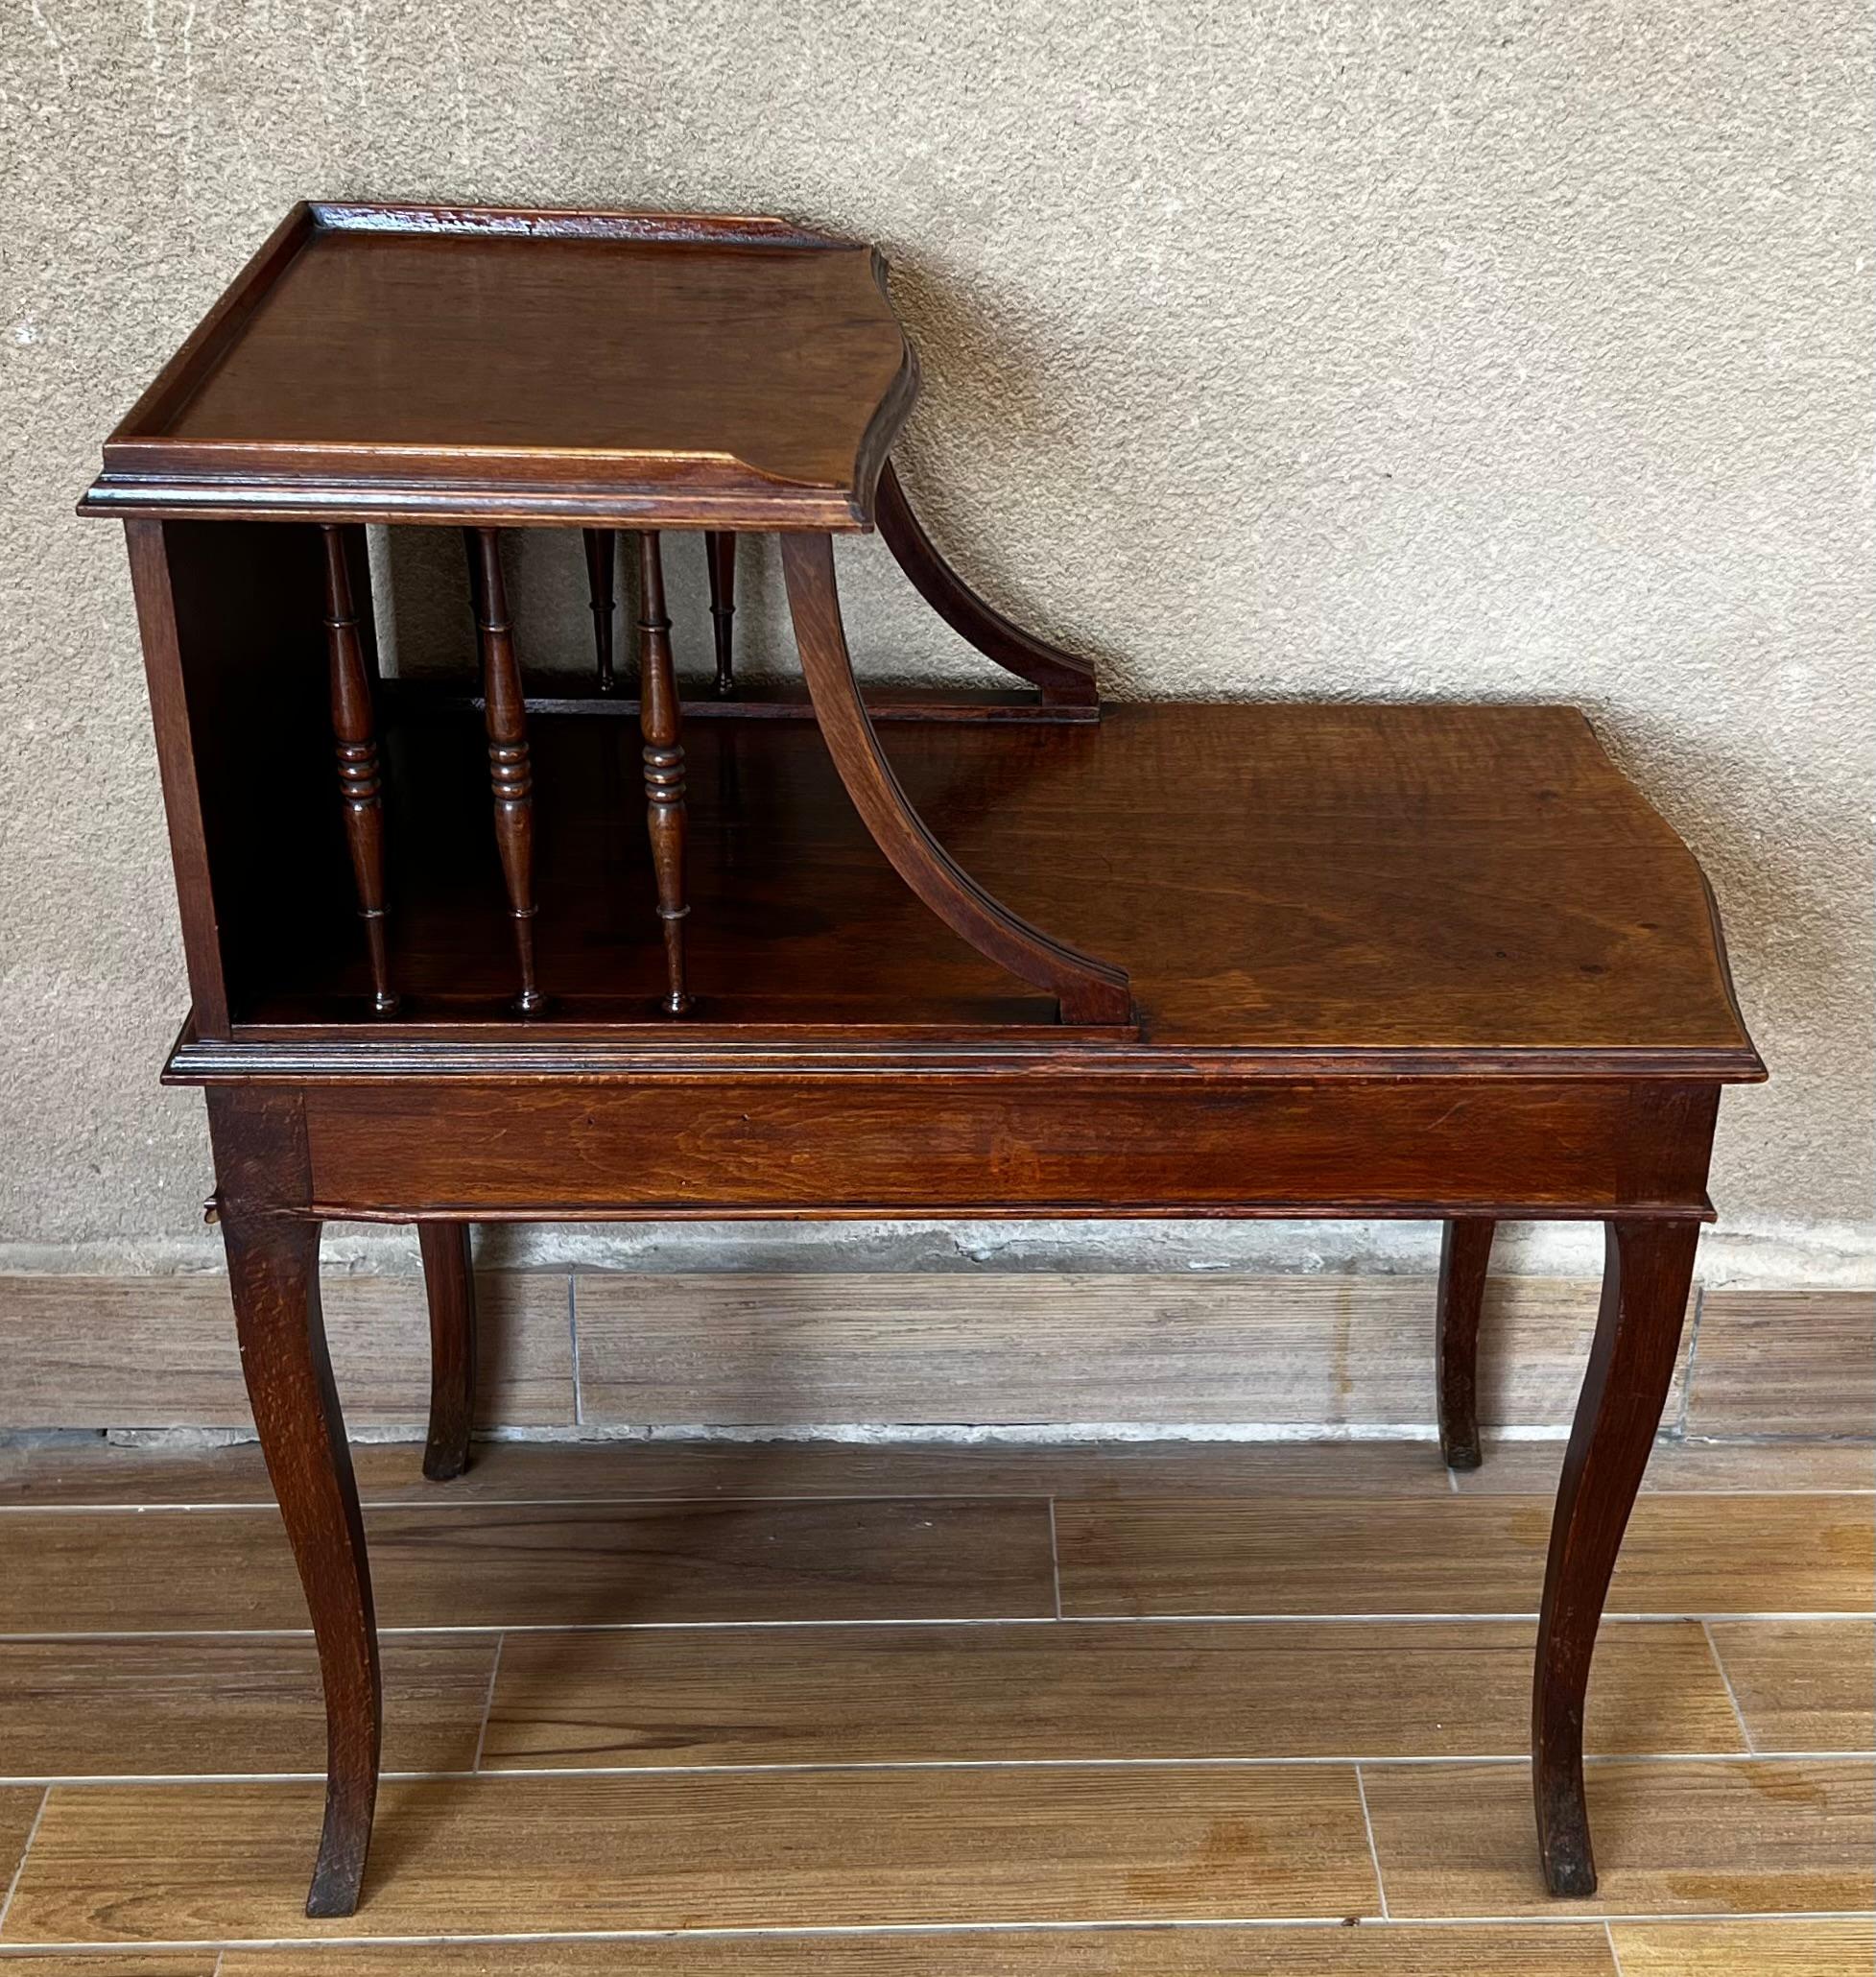 These elegant antique tables were created in Provence, France, circa 1920. Each walnut cabinet stands on cabriole legs over a bombe and scalloped apron. The table features a two-tier plateau with pierced sides and back in between, and the top